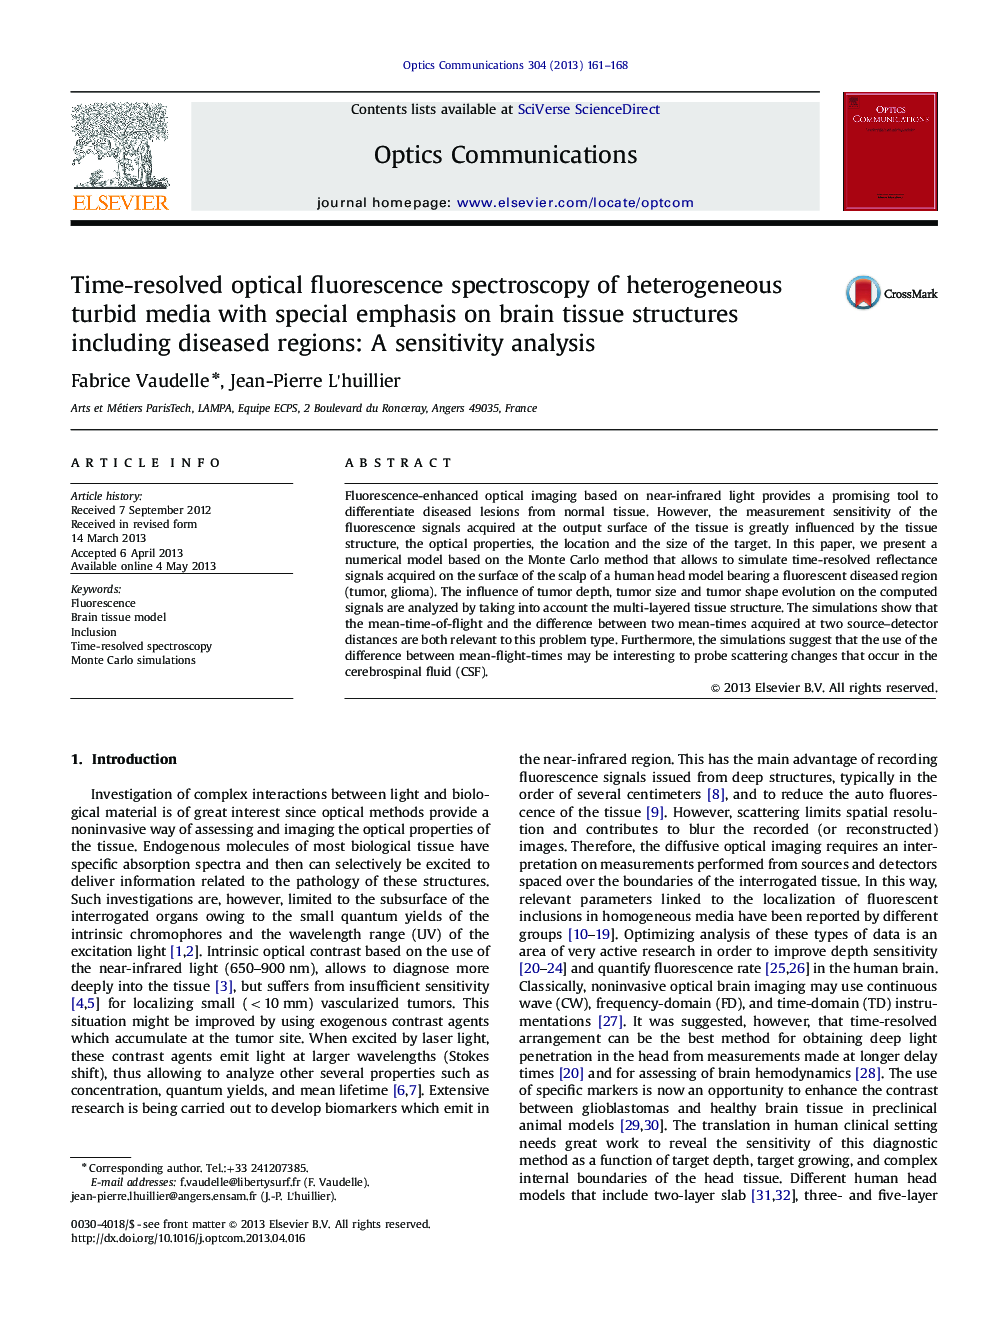 Time-resolved optical fluorescence spectroscopy of heterogeneous turbid media with special emphasis on brain tissue structures including diseased regions: A sensitivity analysis